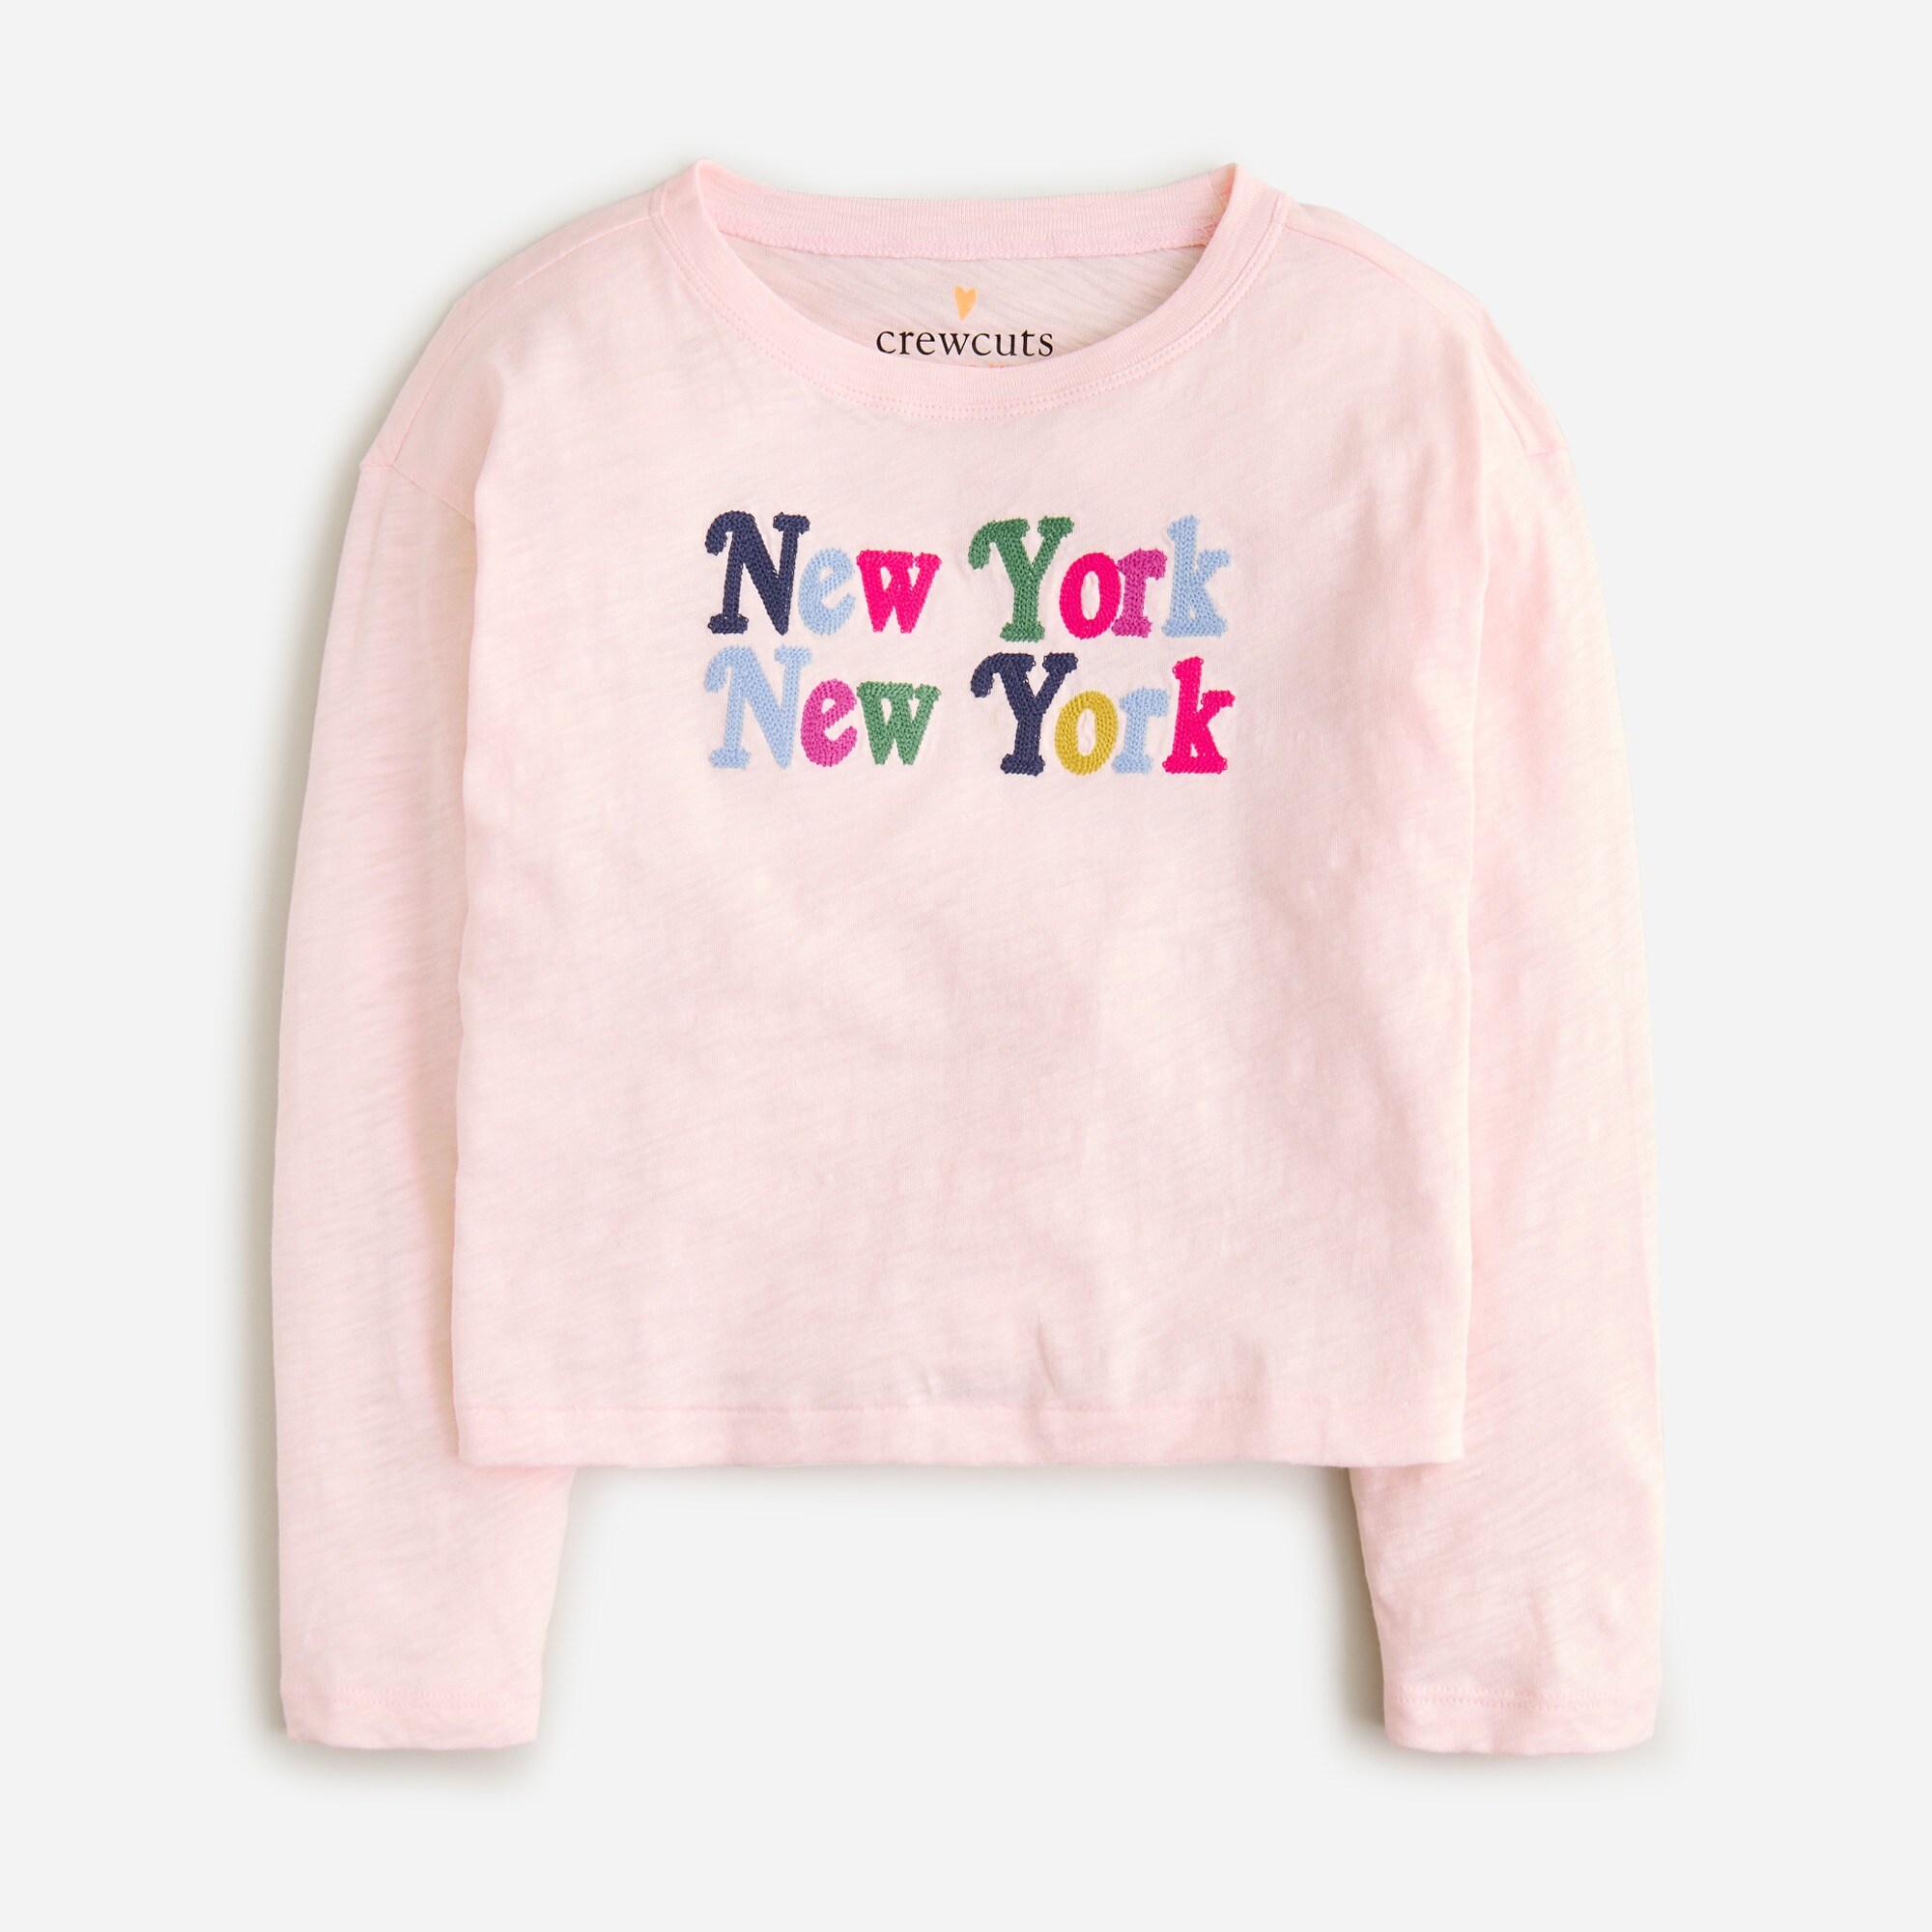  Girls' cropped New York graphic T-shirt with embroidery